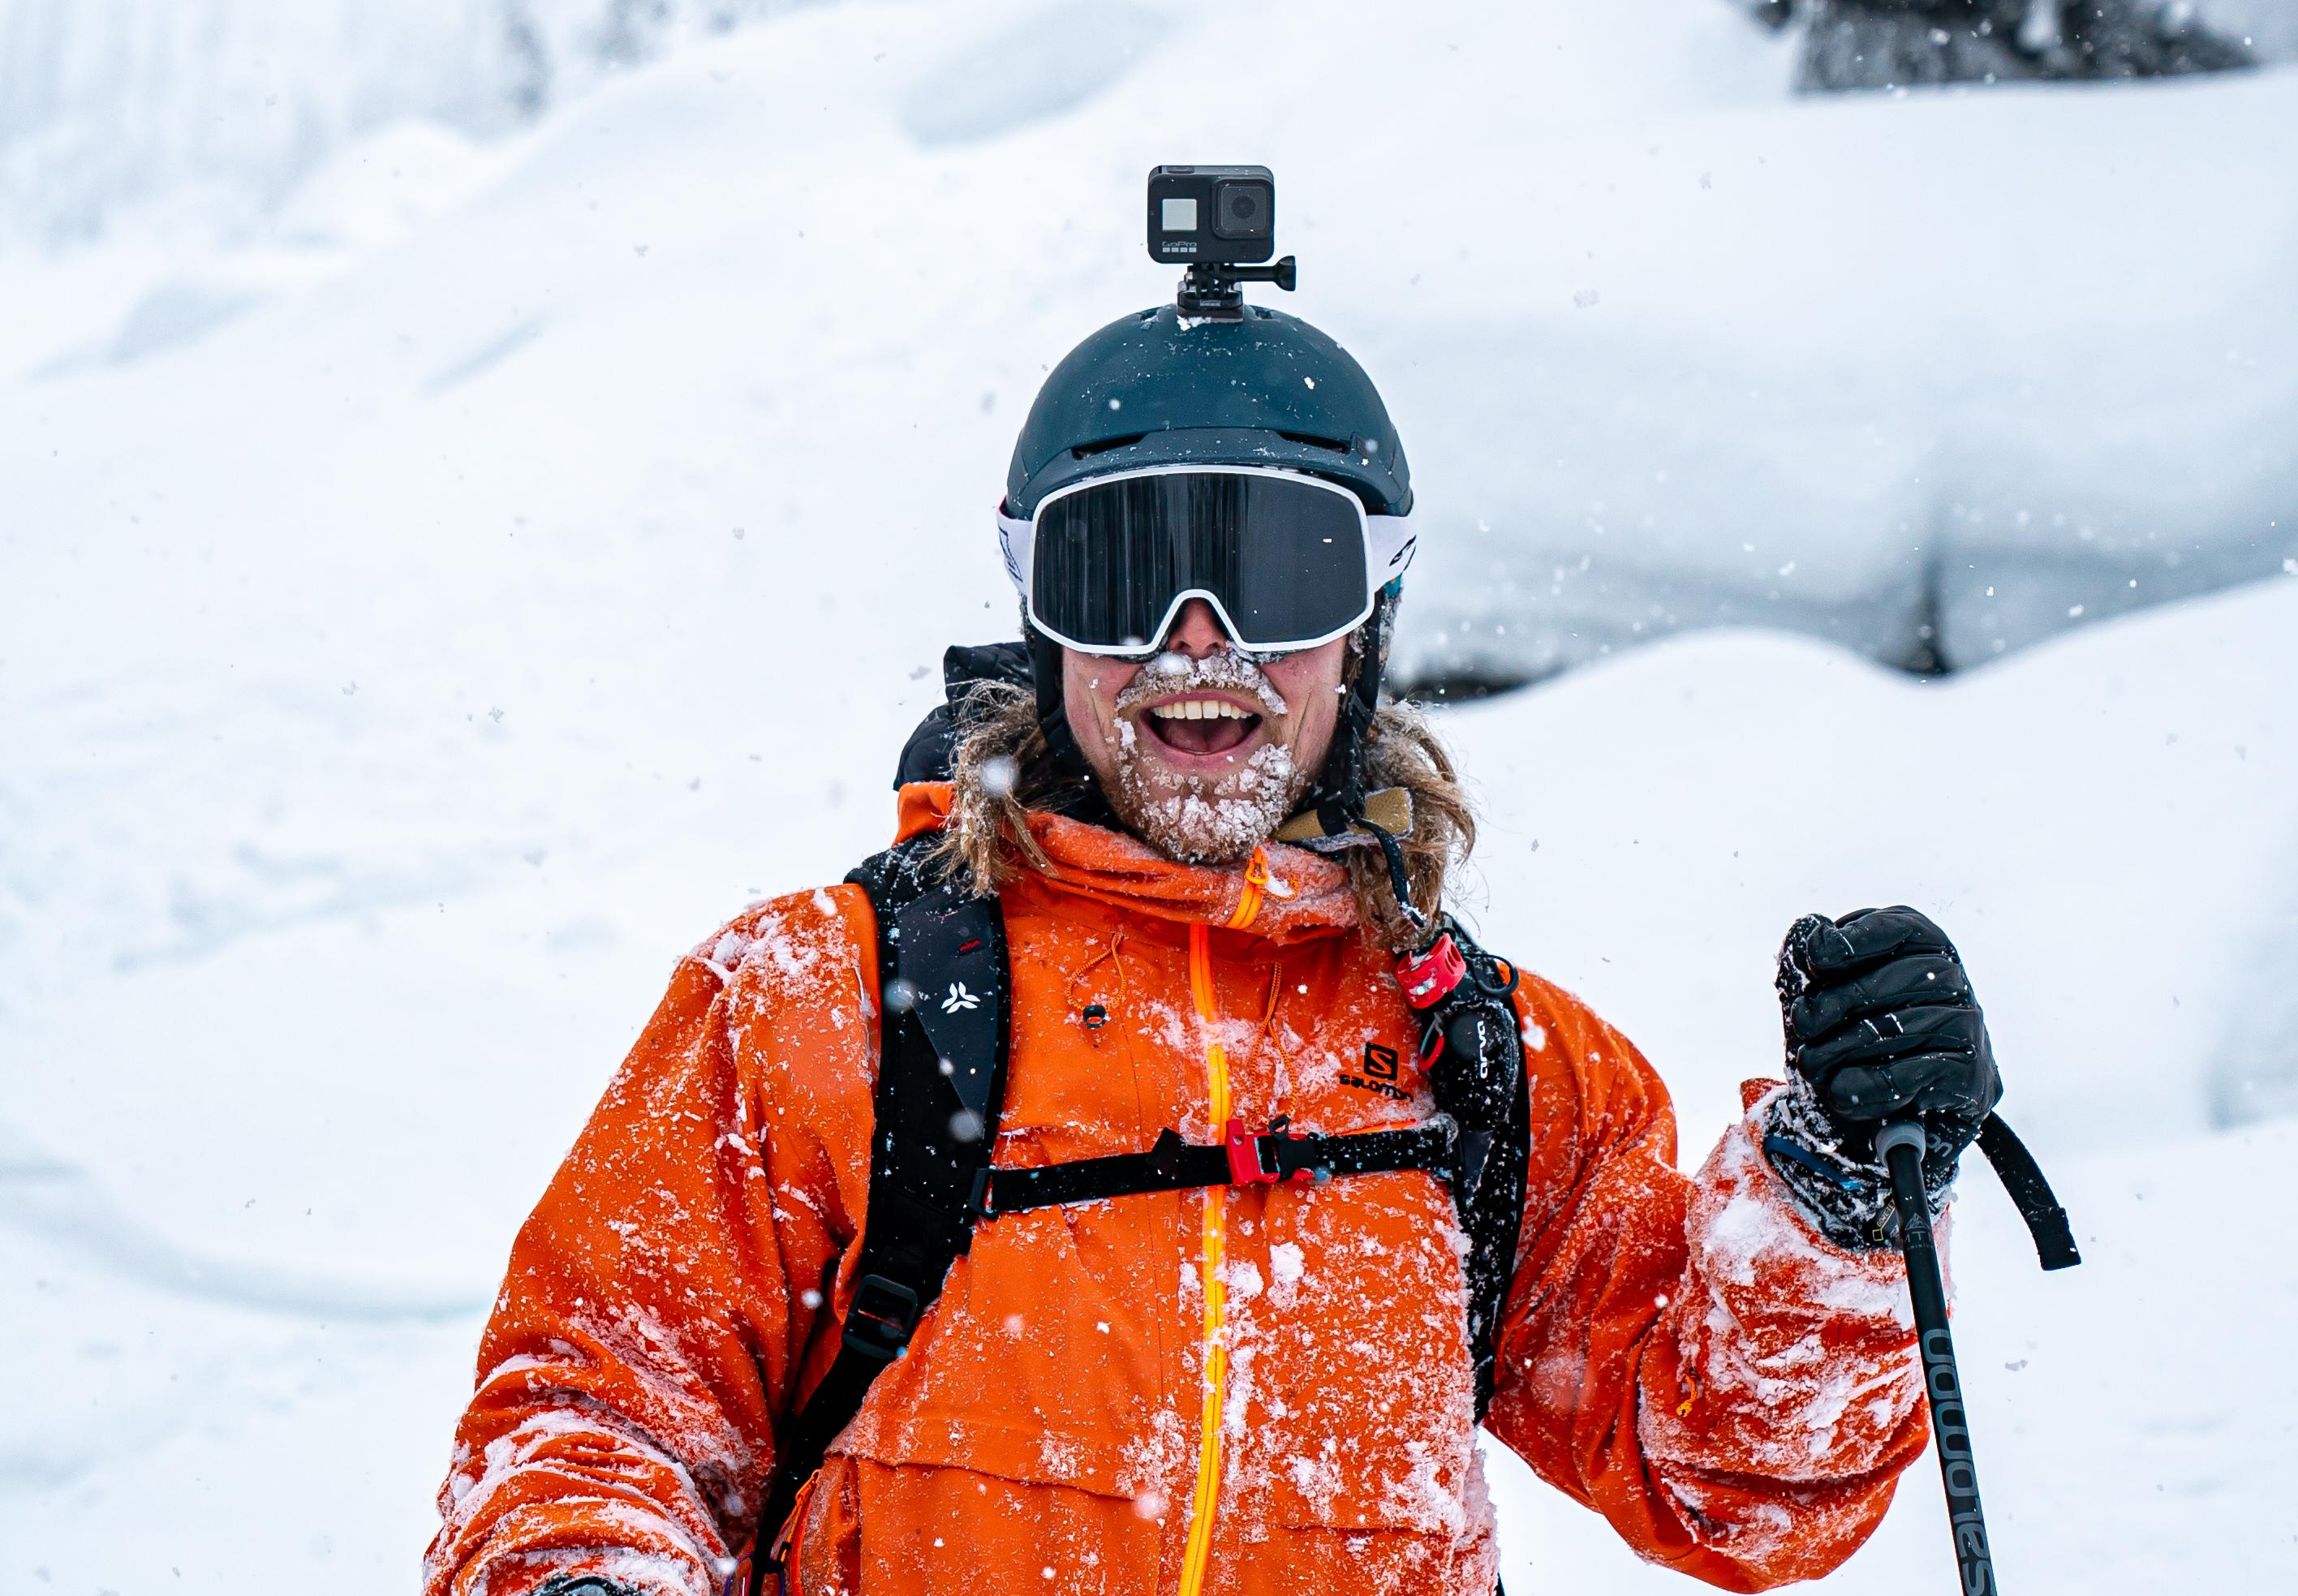 Skier smiling outdoors